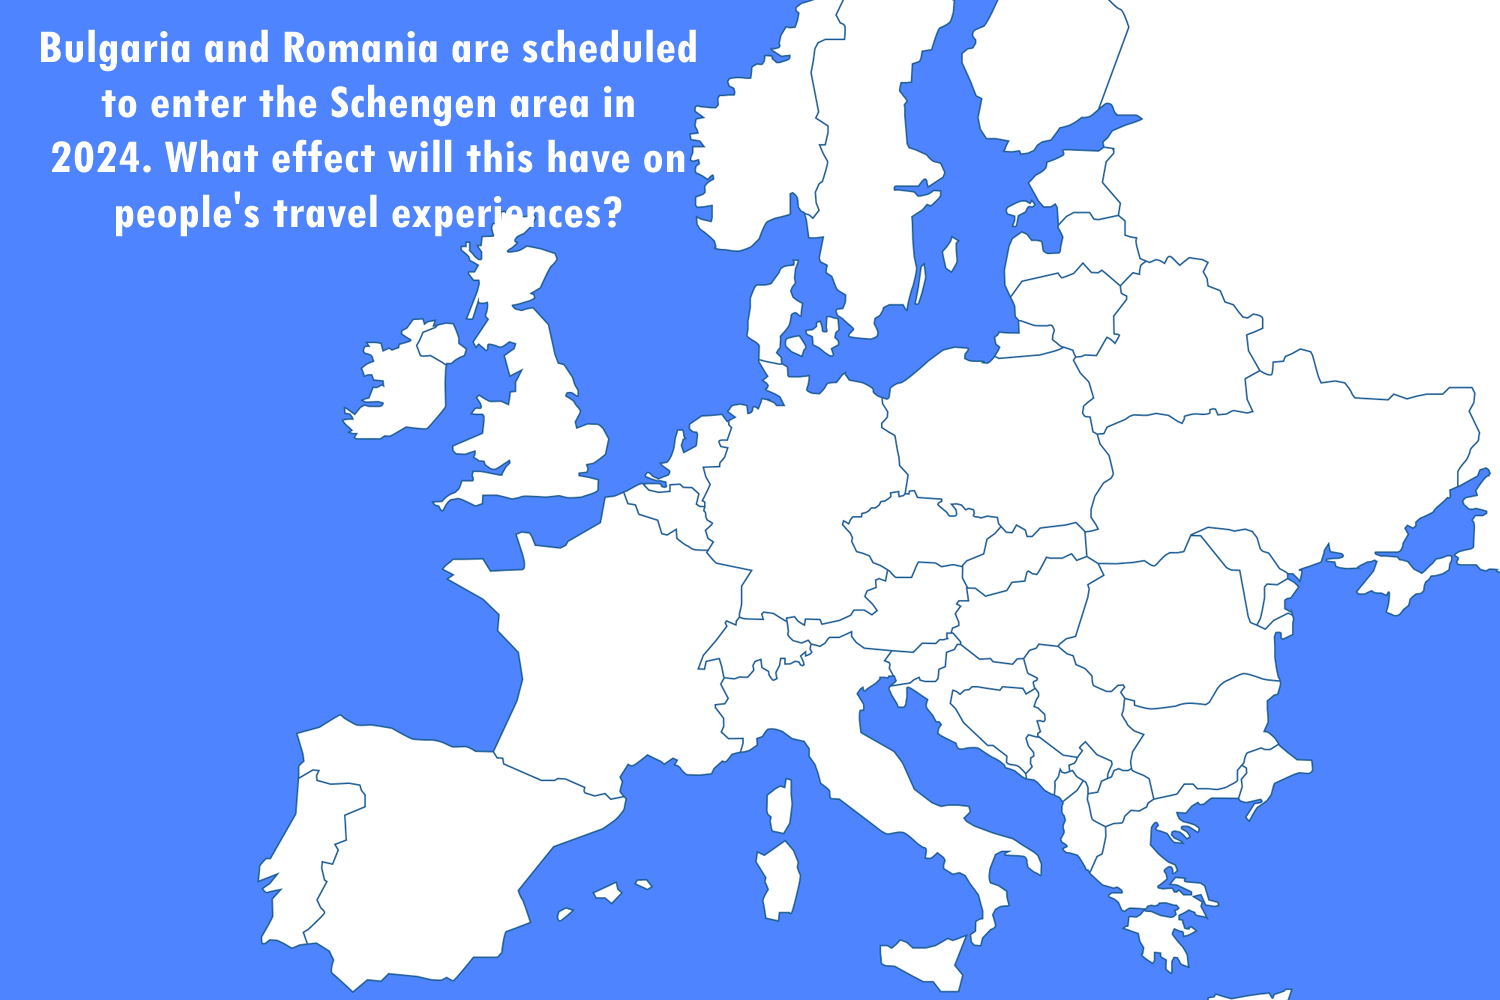 Bulgaria and Romania are scheduled to enter the Schengen area in 2024. What effect will this have on people's travel experiences